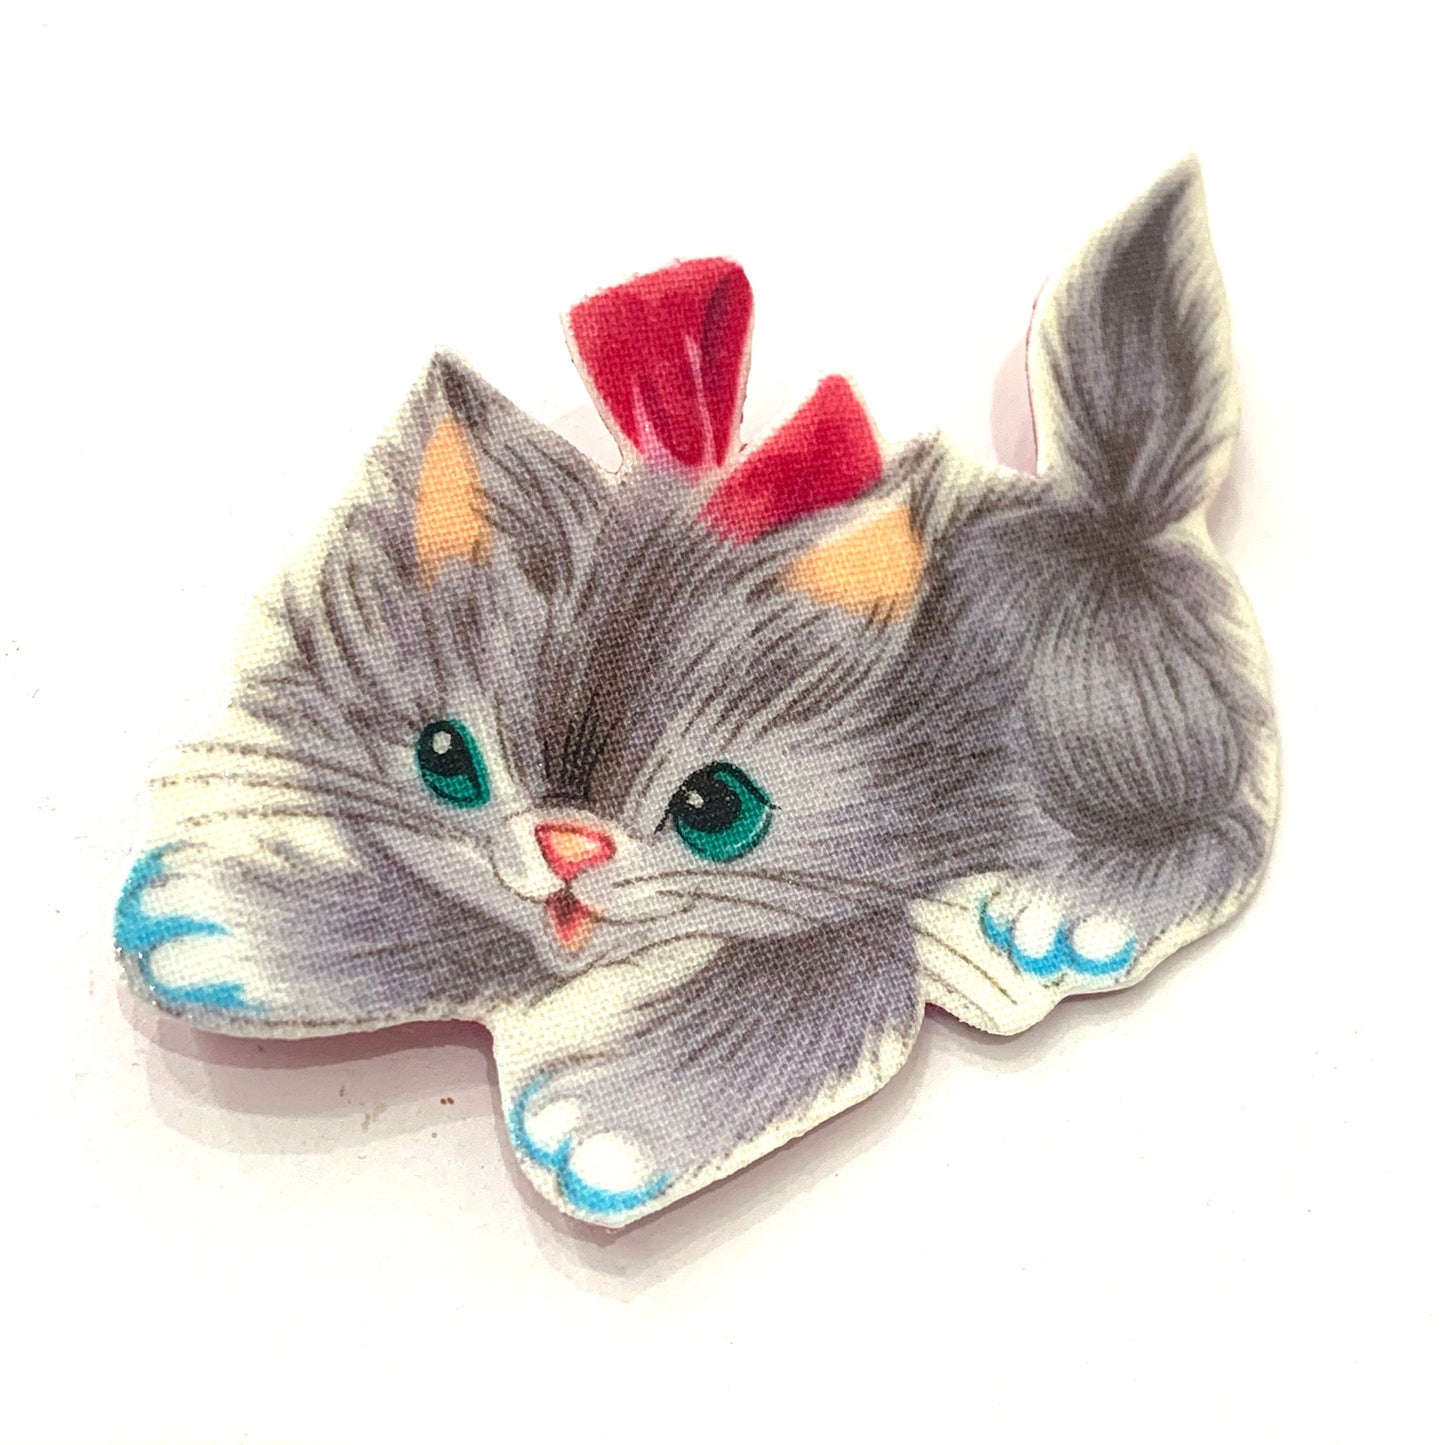 THIS BIRD HAS FLOWN- Fabric Remnant Brooches- Pouncing Pretty Kitty (Light)